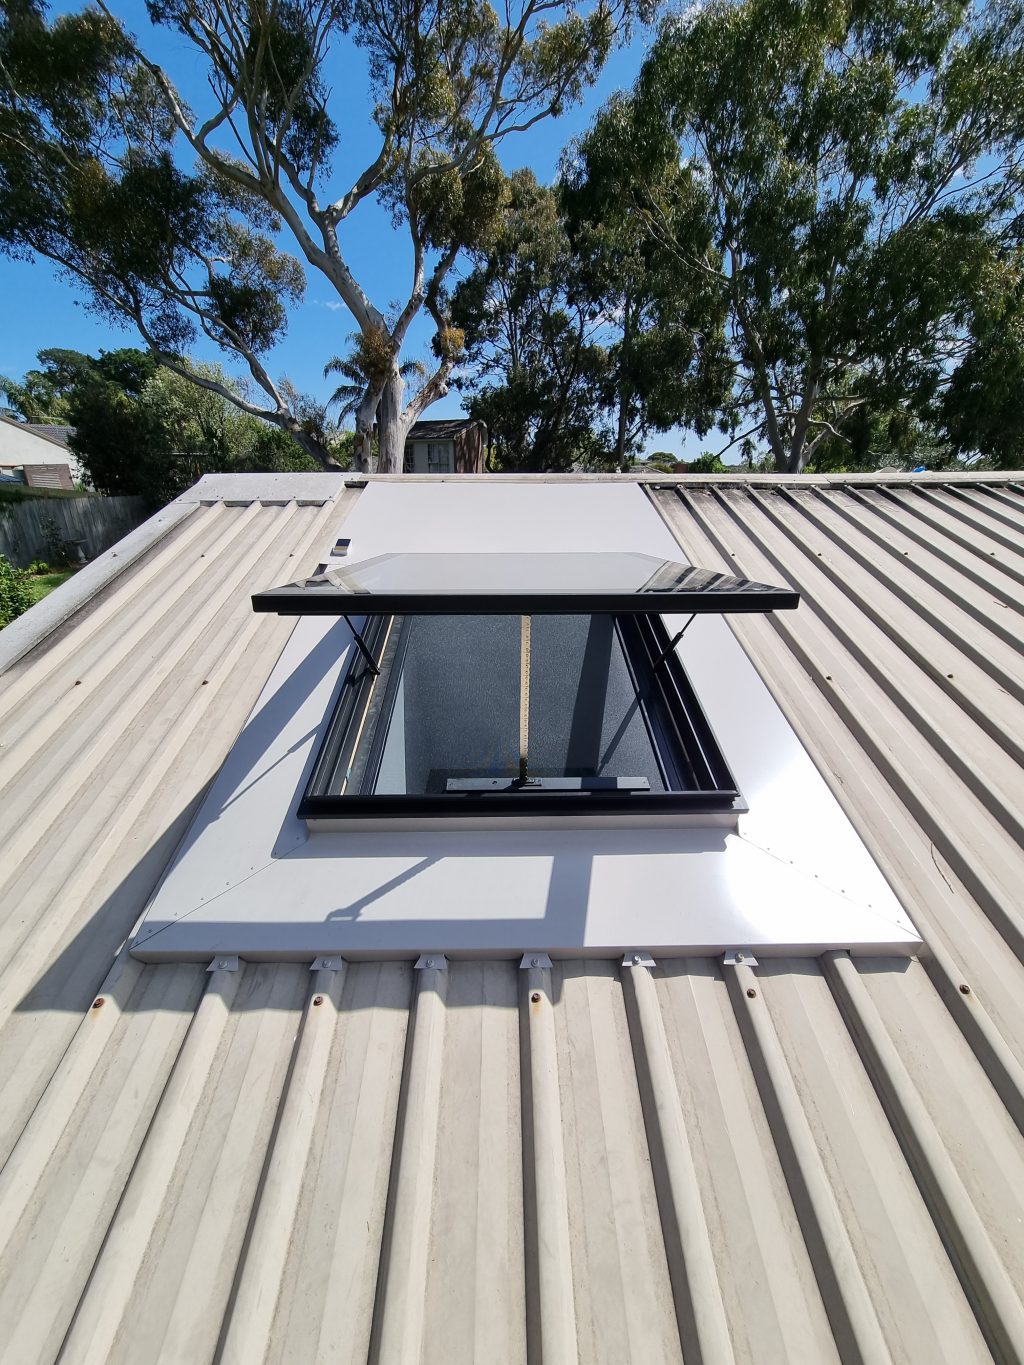 Electric opening skylight on metal roof